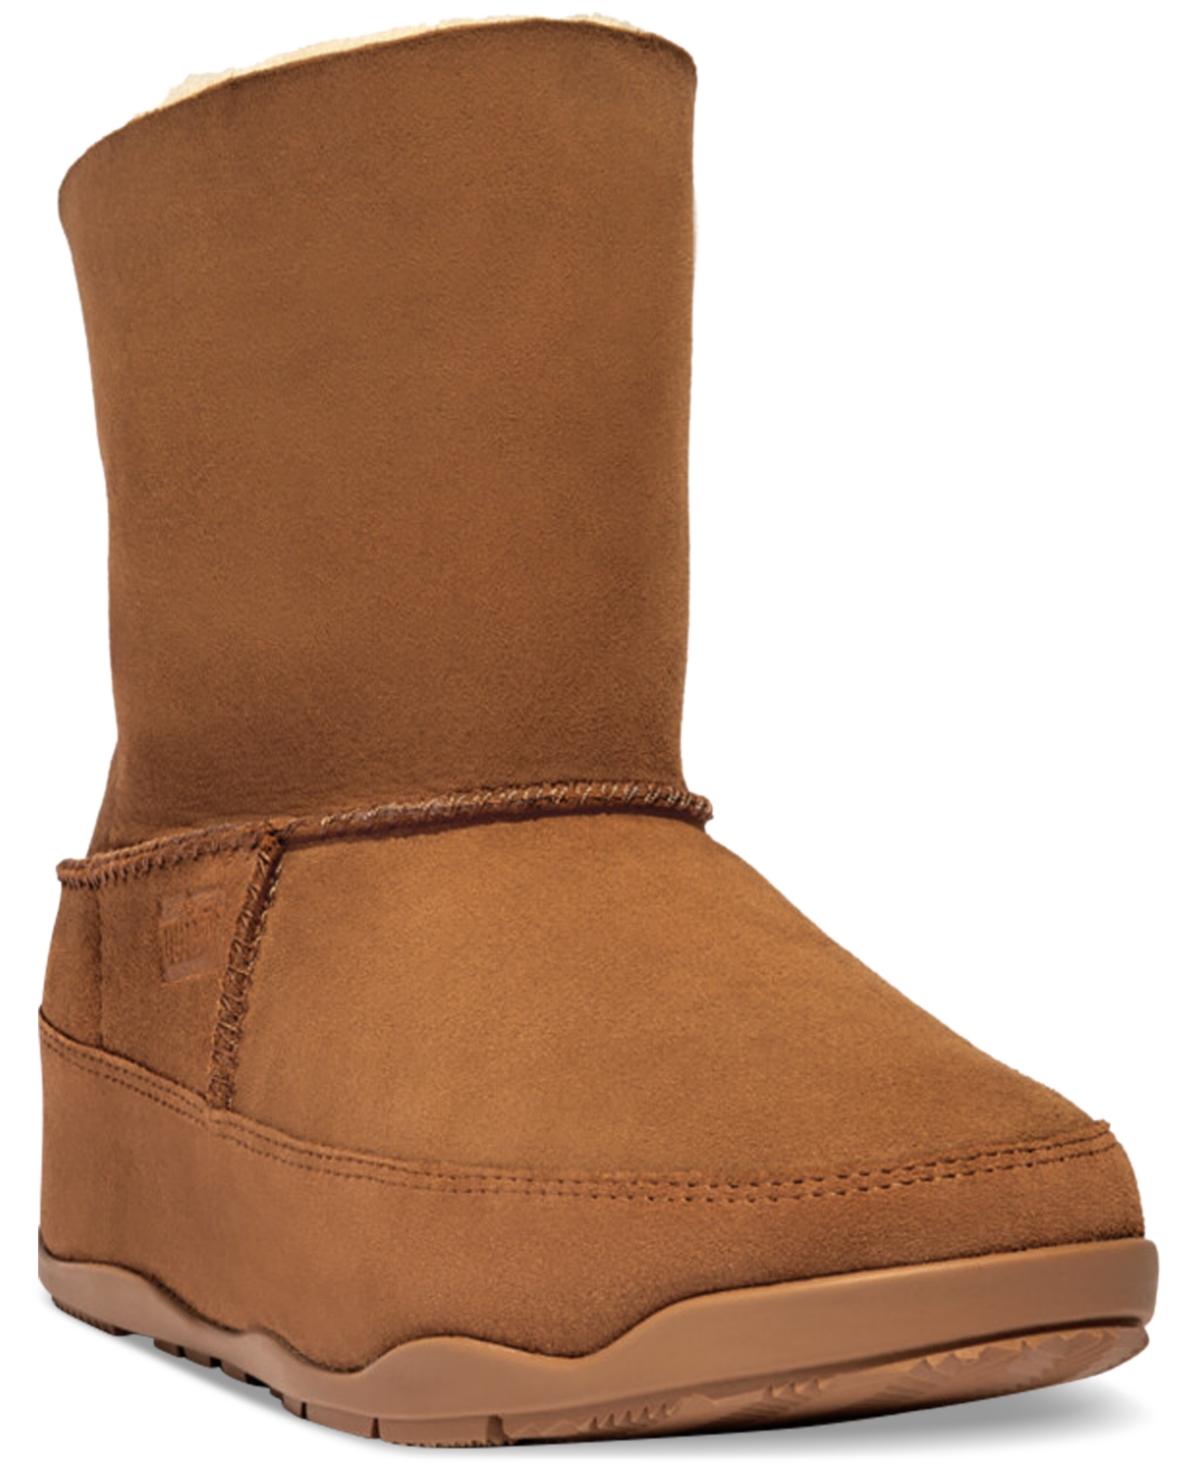 Fitflop Women's Original Mukluk Shorty Double-face Boots Women's Shoes In Light Tan